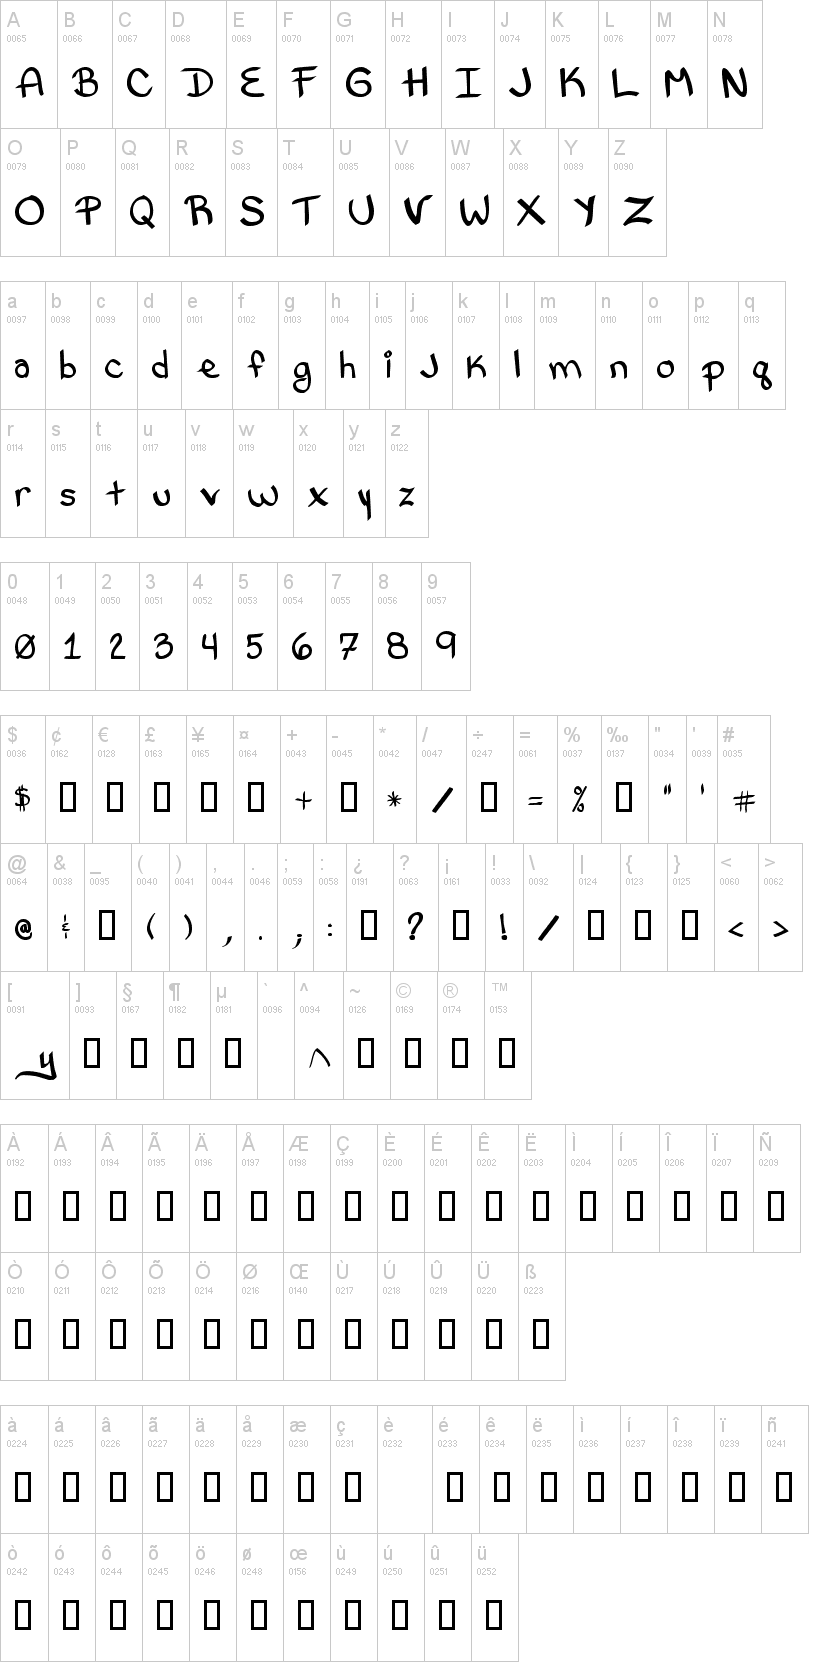 Bethany Style Letters